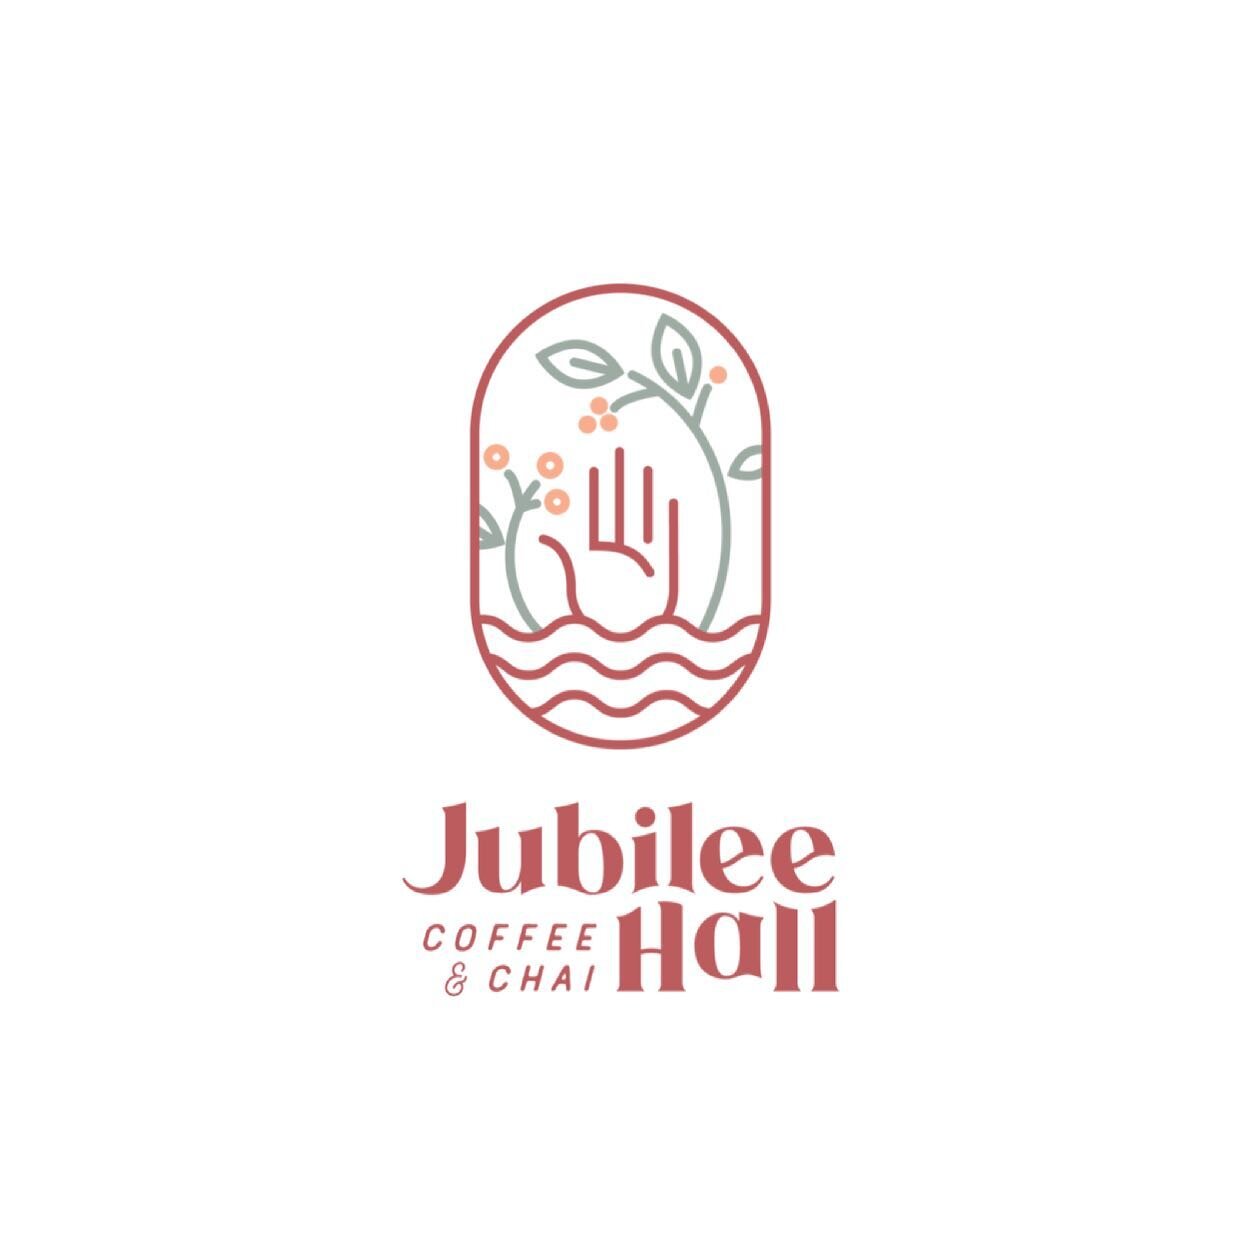 Come thru Saturday 10am-2pm to help support our friends Jubilee Hall and their new non profit coffee shop. All profits from their Saturday sales throughout the summer will go directly to their launch this fall. Check our more @ jubileehallpdx.org and